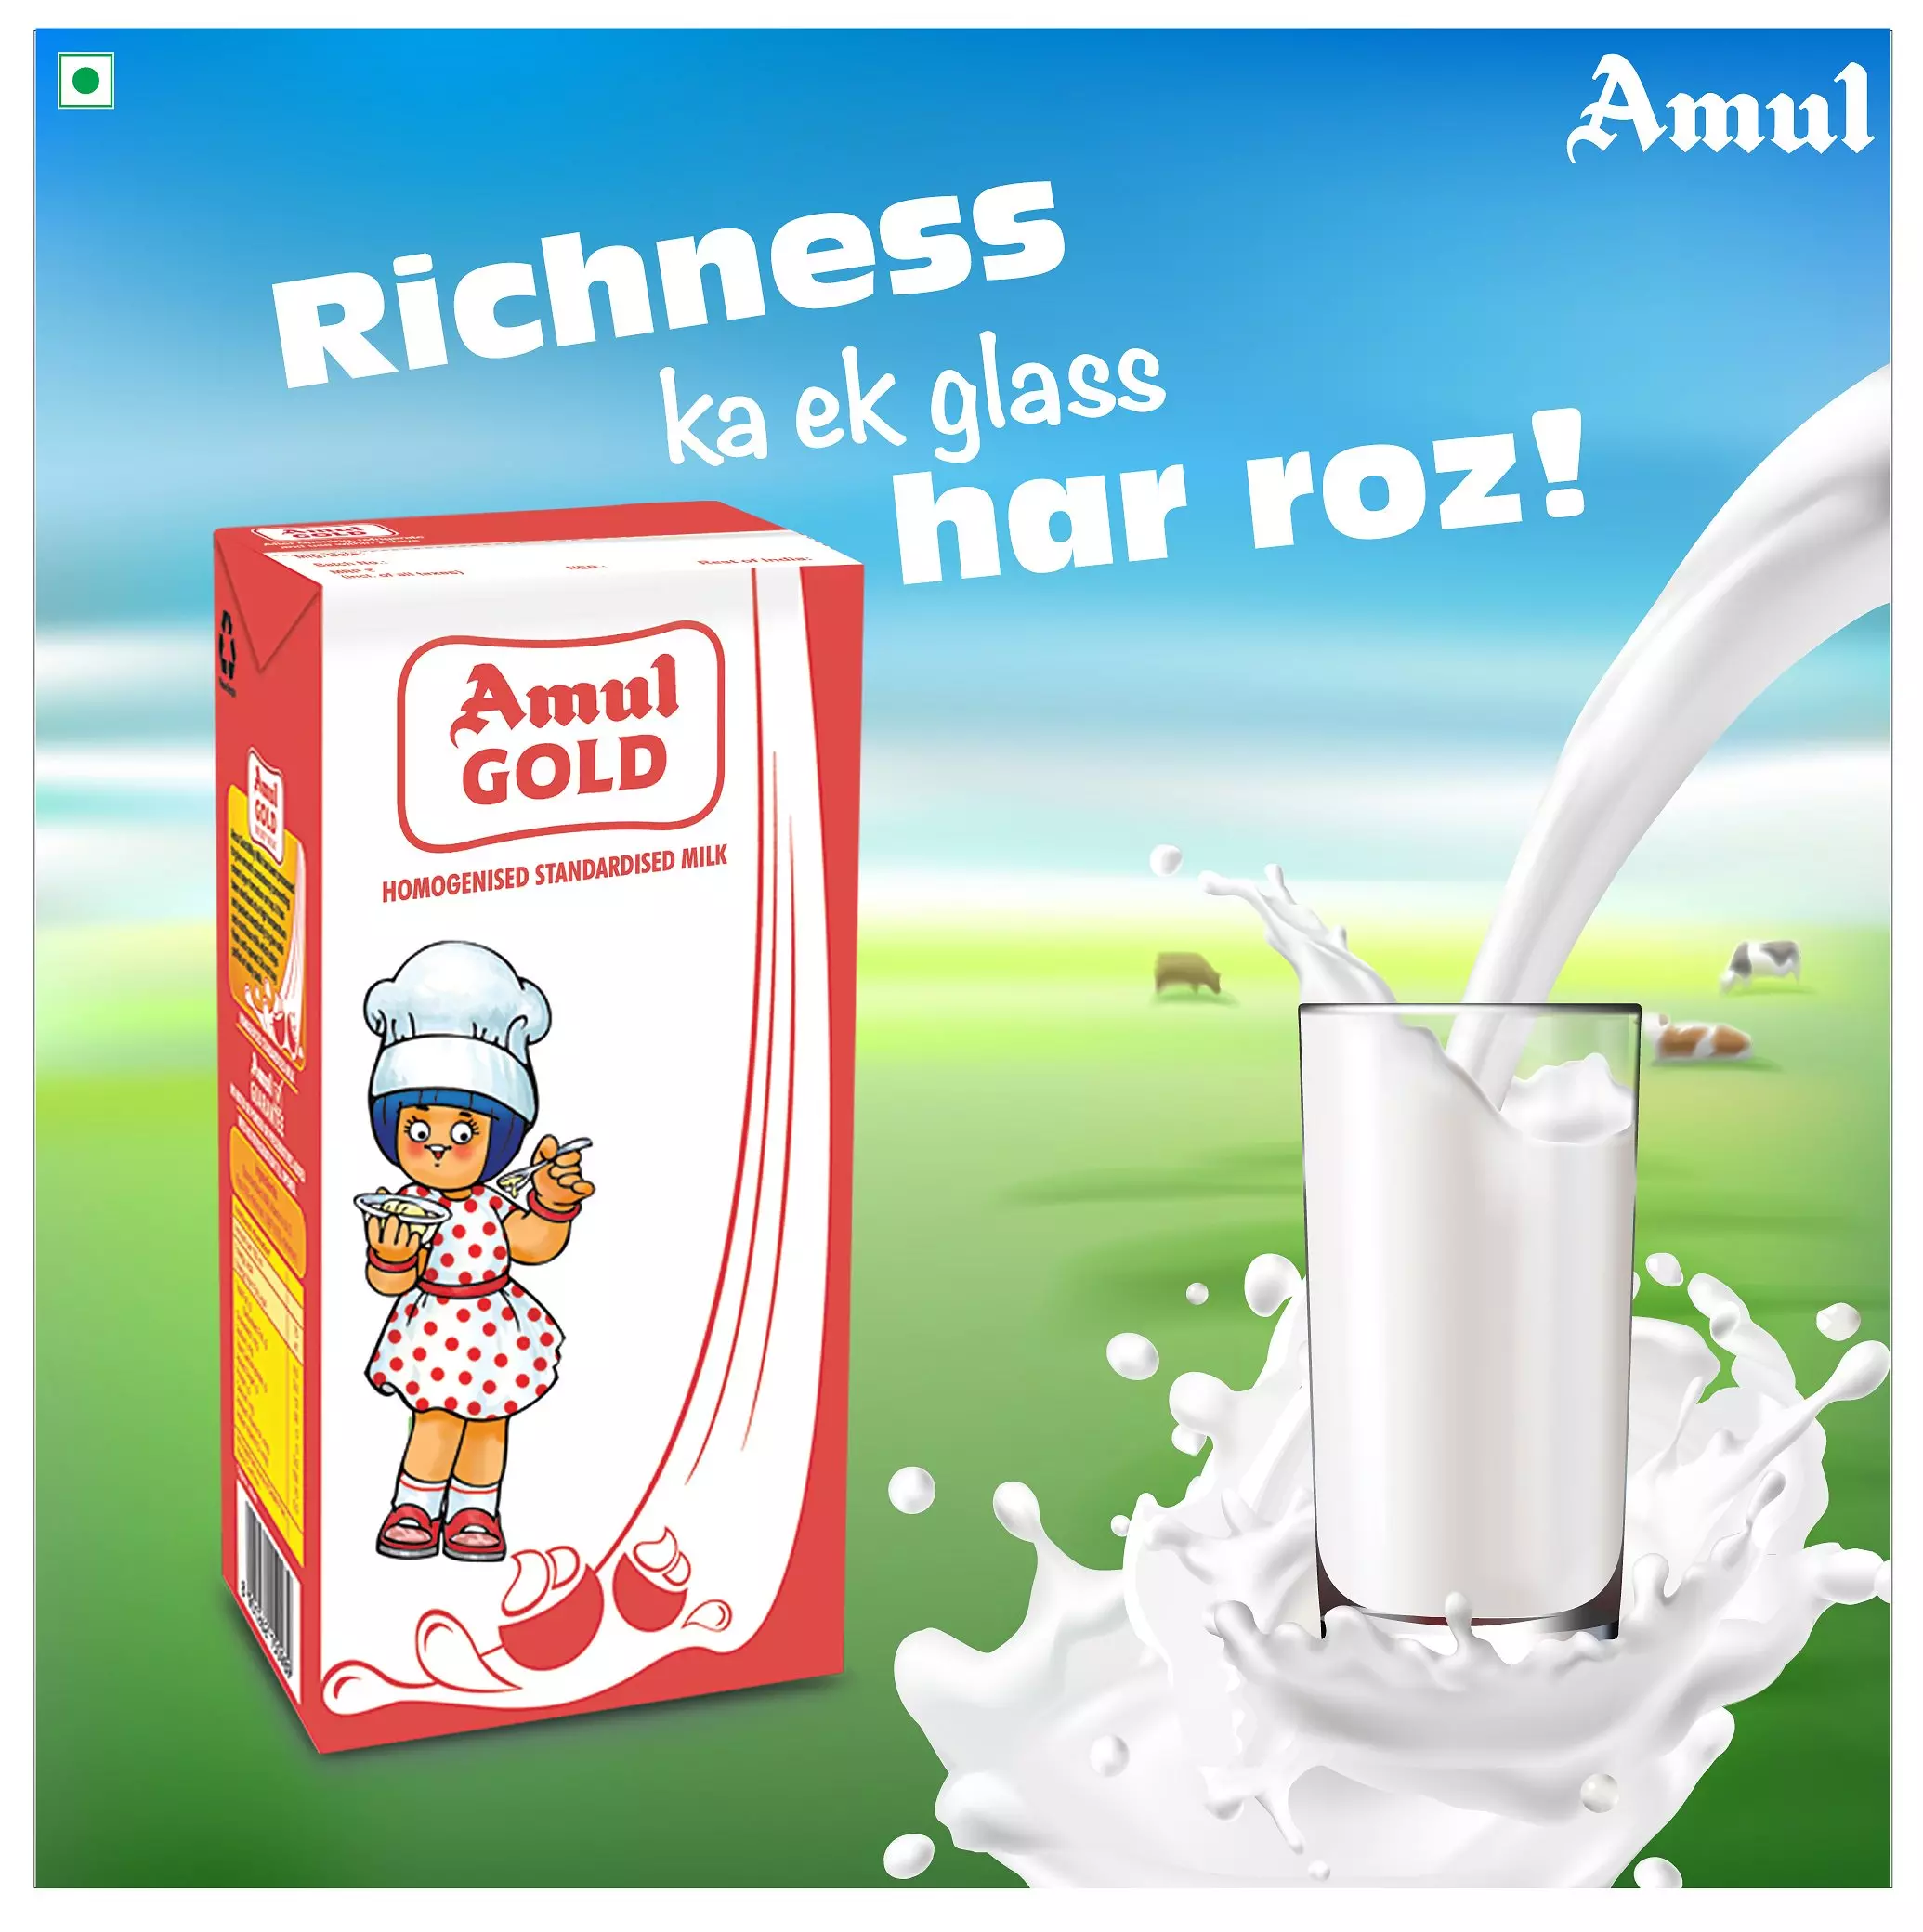 Amul Fresh Milk to Debut in International Markets, Targeting US Consumers